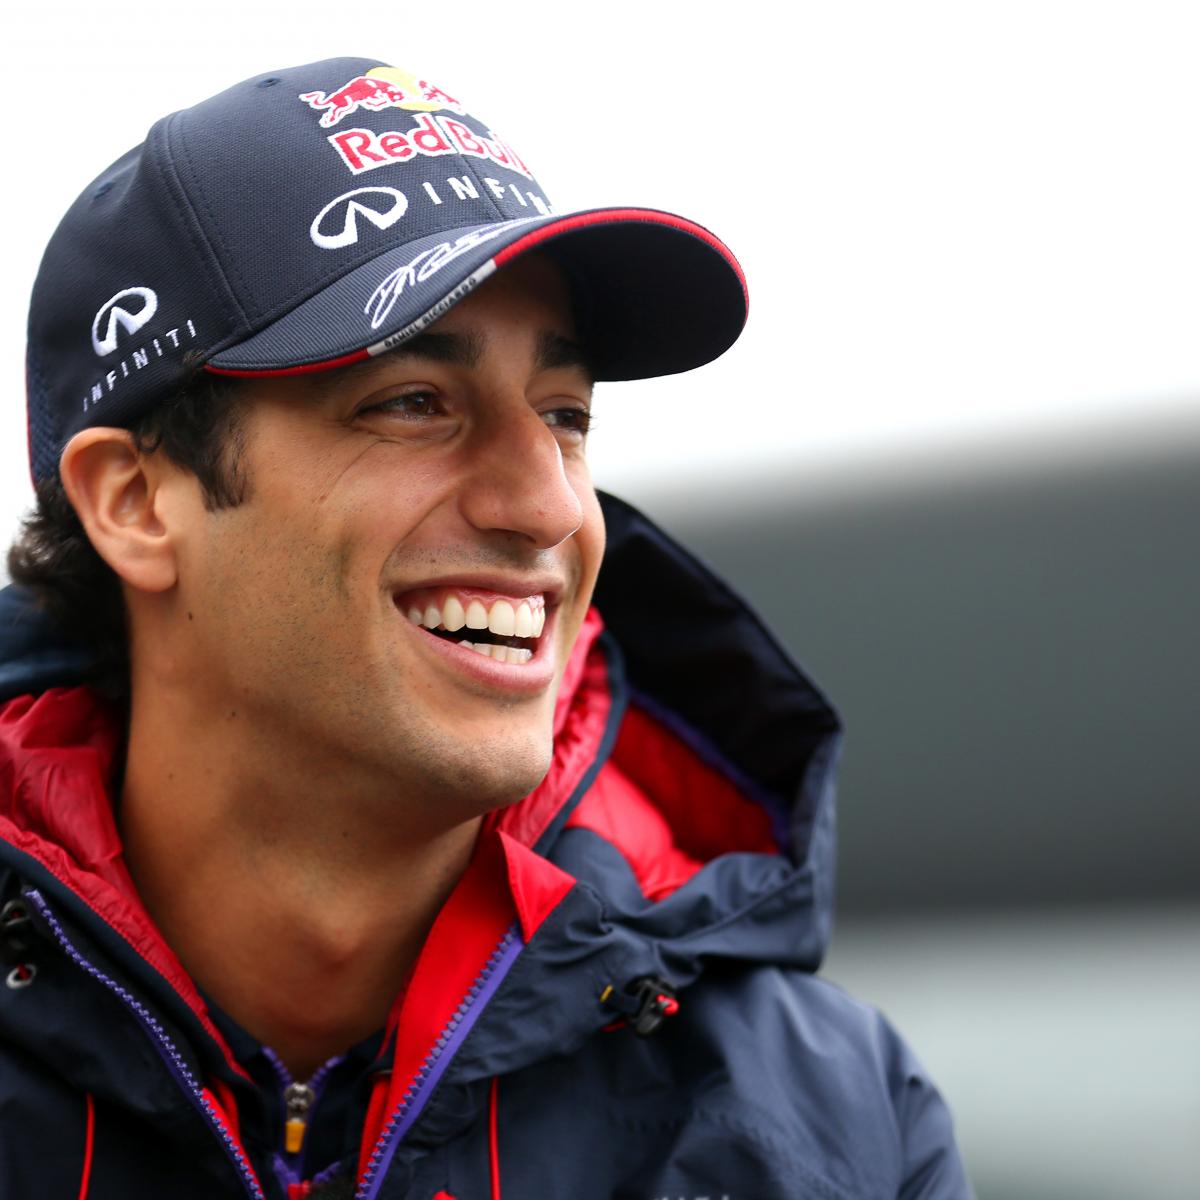 Reappraising Daniel Ricciardo's Talent After Start to F1 Career at Red ...